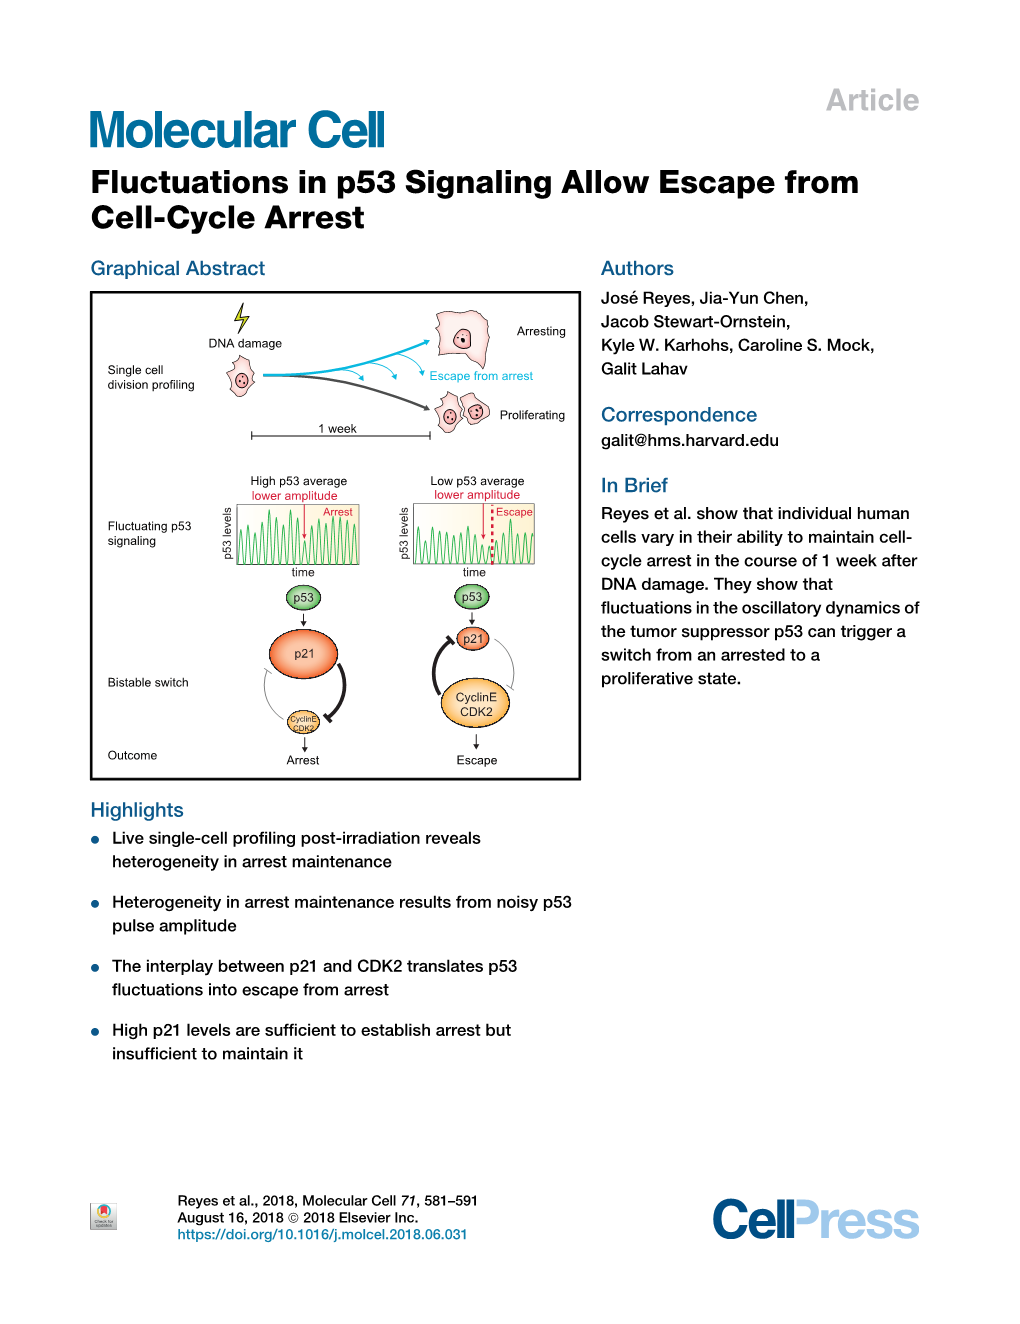 Fluctuations in P53 Signaling Allow Escape from Cell-Cycle Arrest